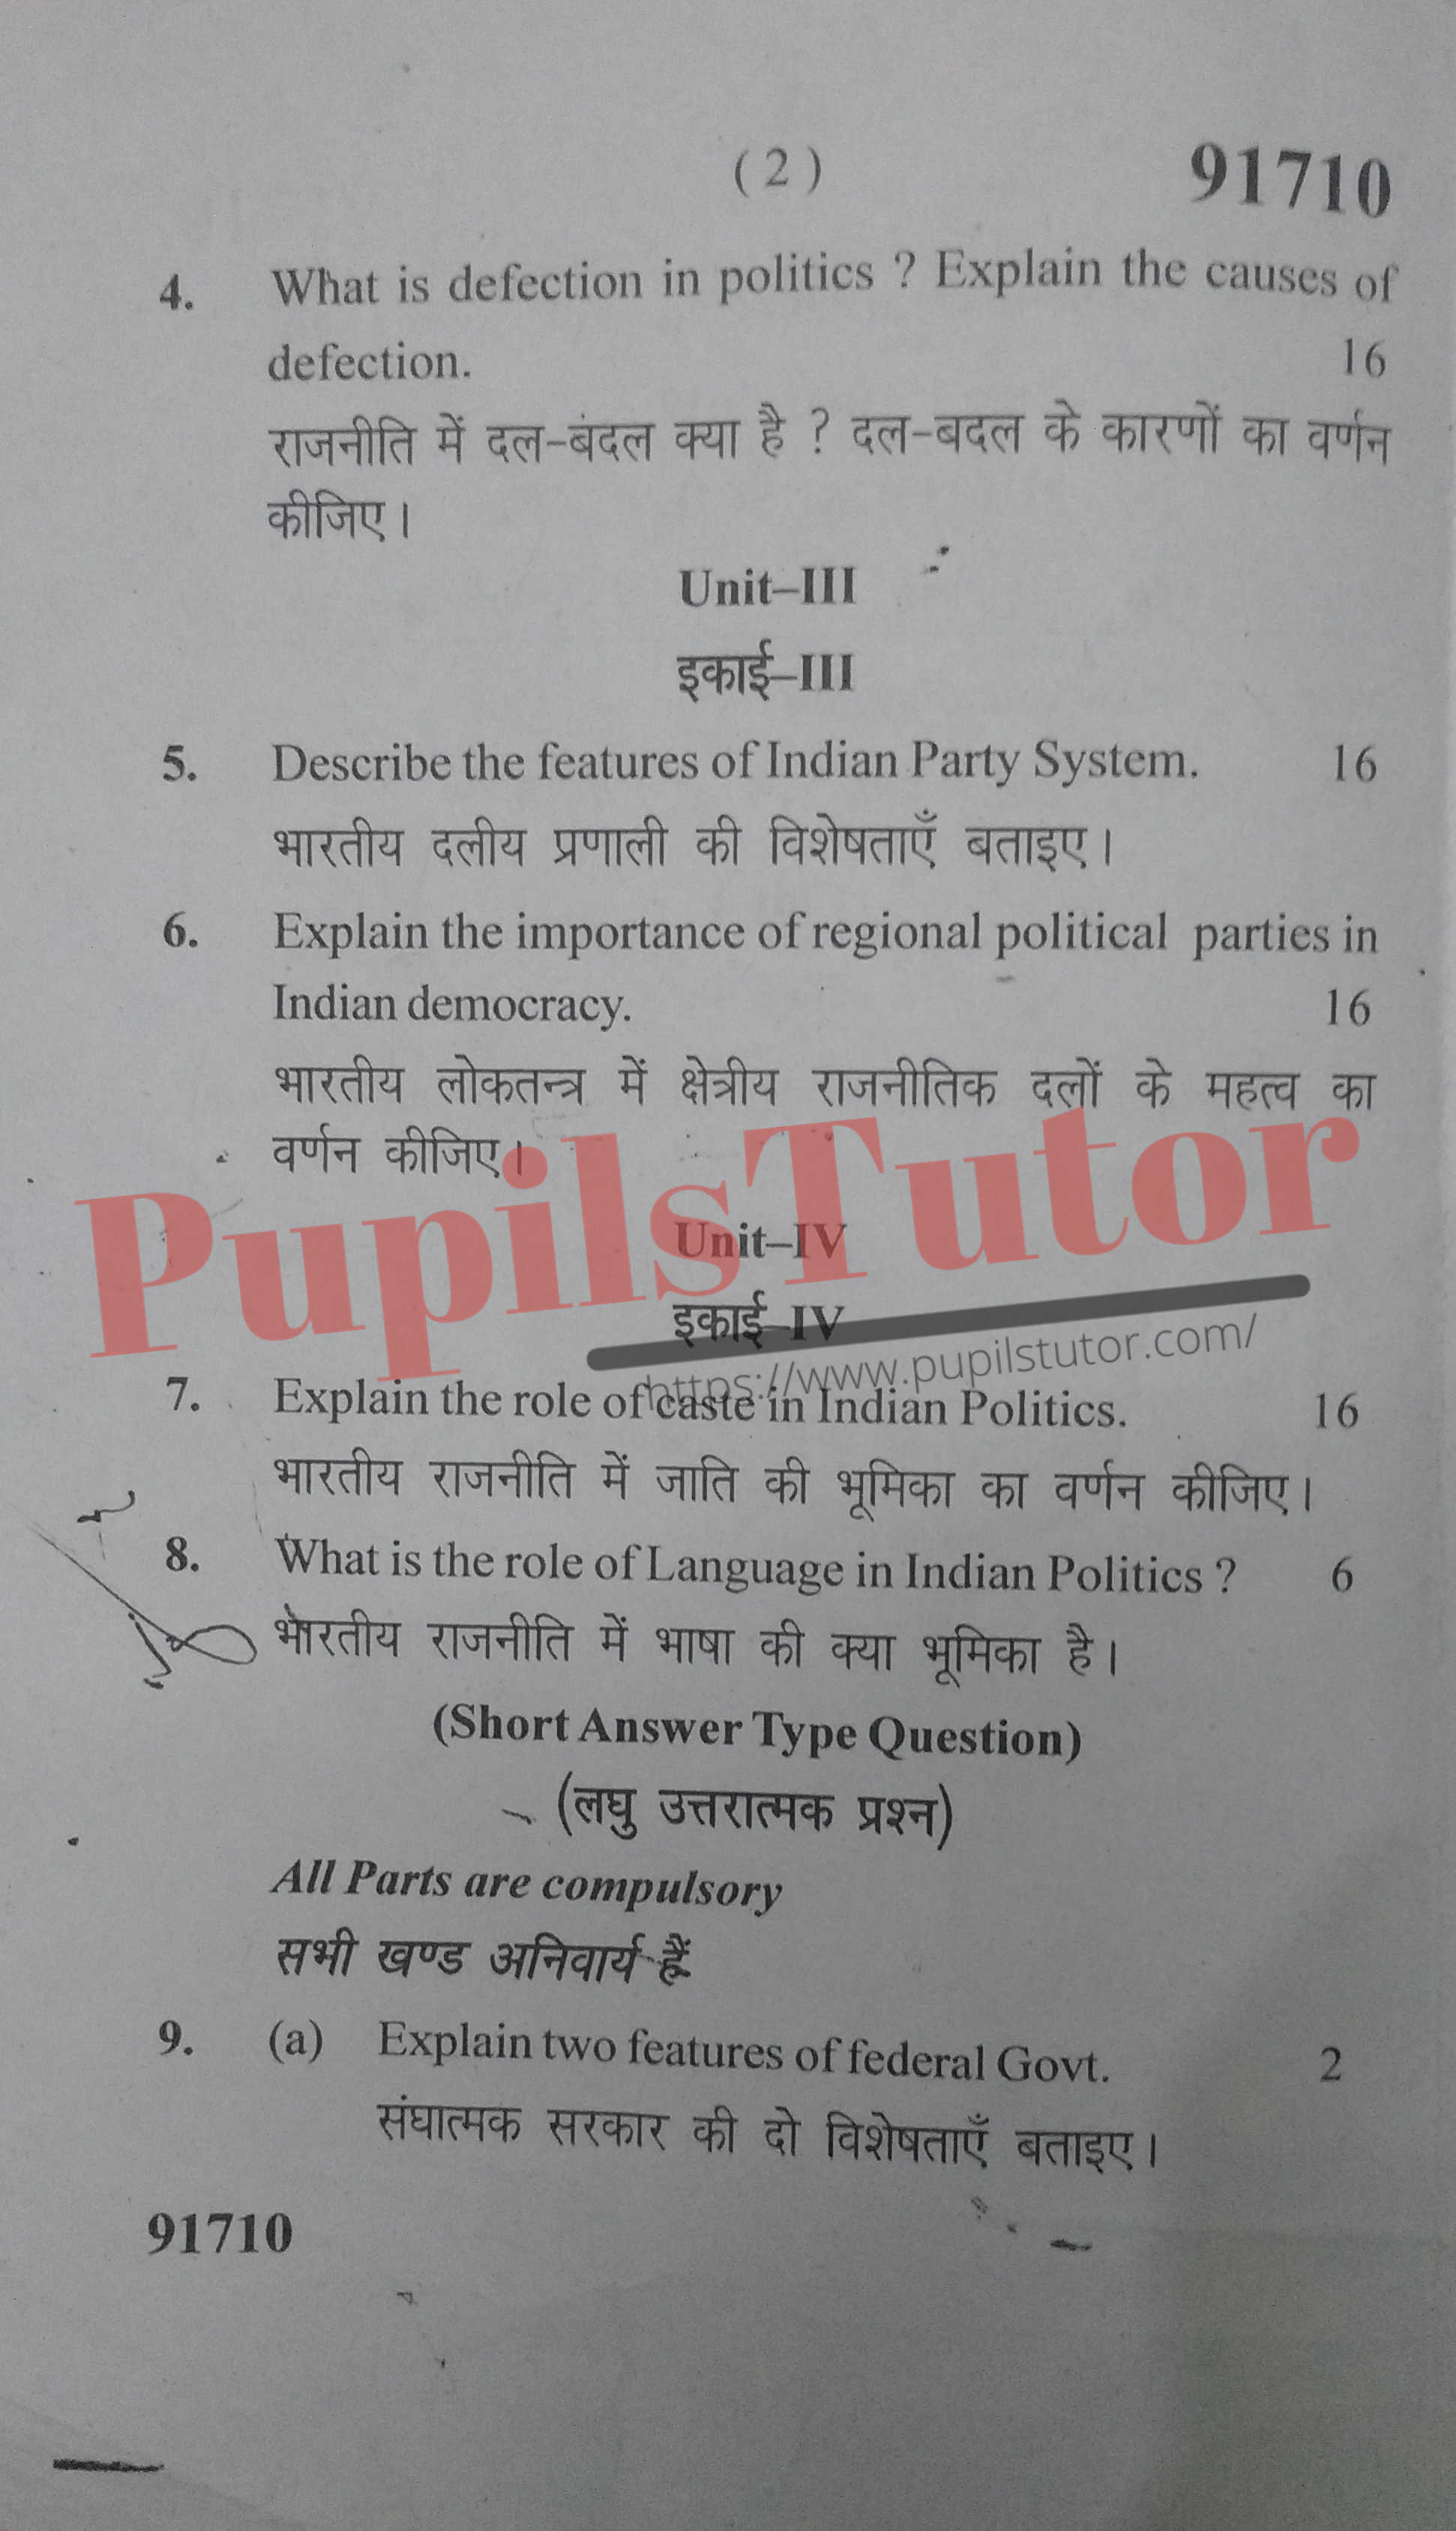 M.D. University B.A. Political Science (I) Second Semester Important Question Answer And Solution - www.pupilstutor.com (Paper Page Number 2)